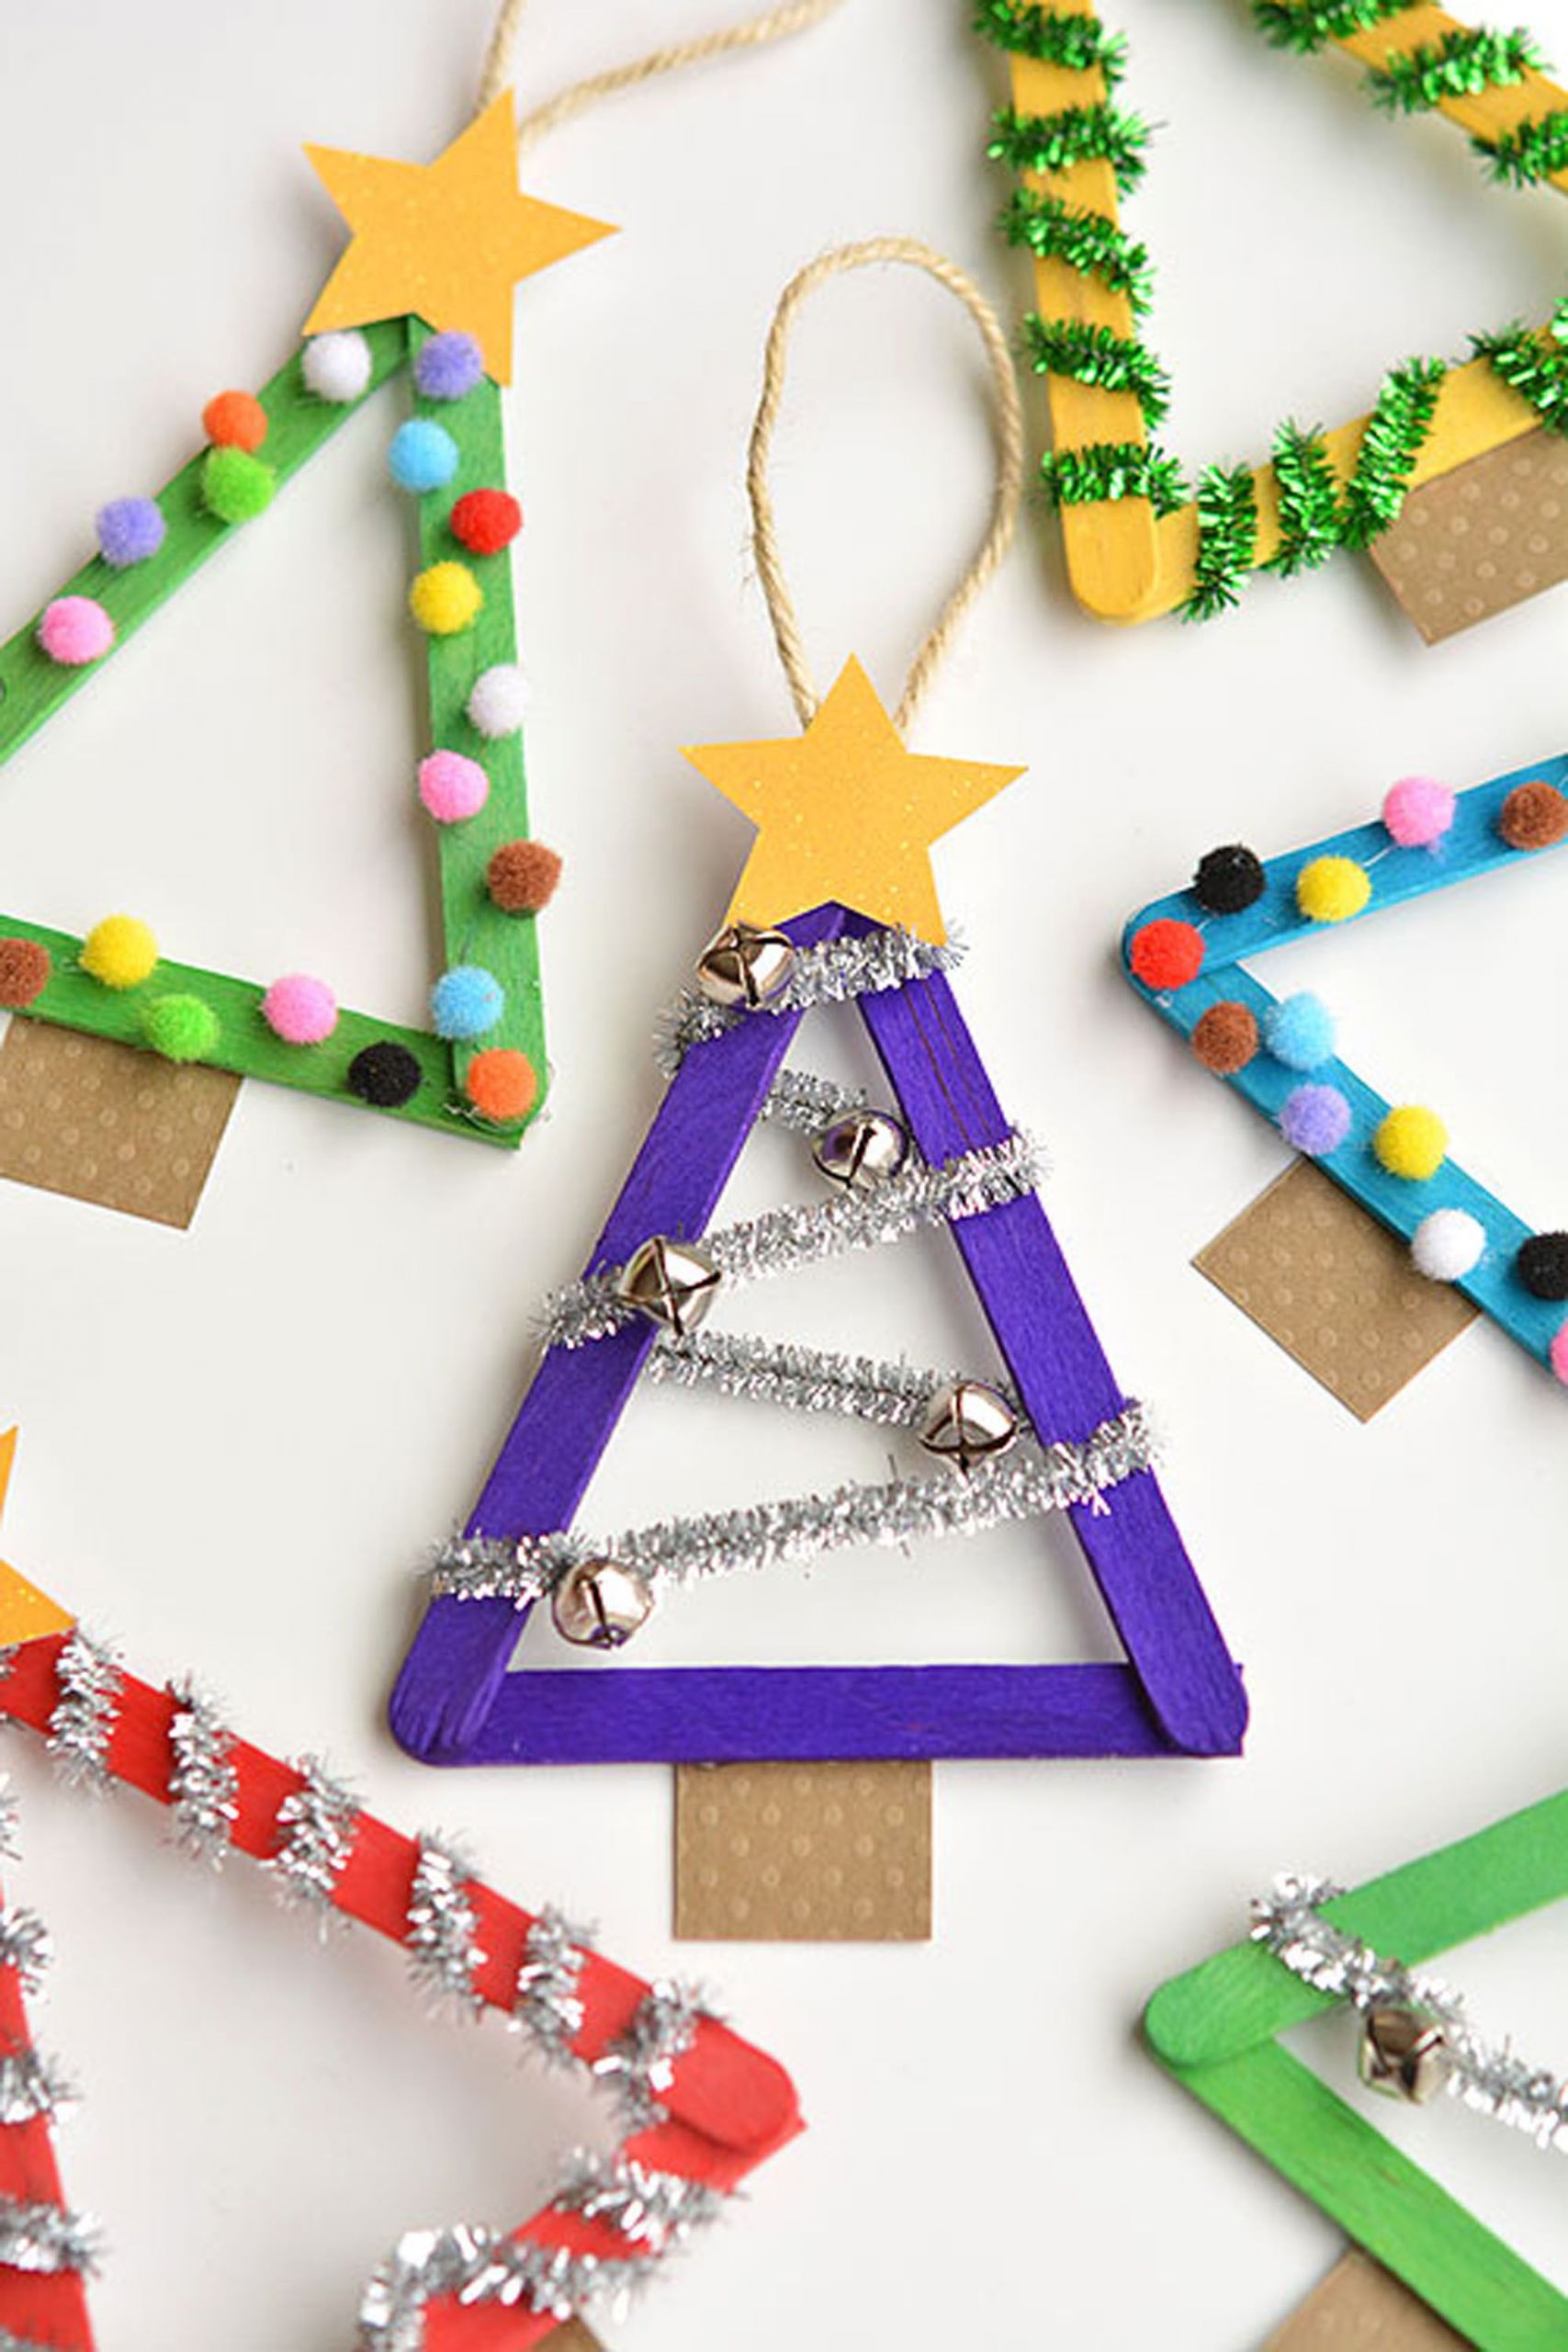 Preschool Christmas Ornament Craft Ideas
 18 Christmas Crafts for Toddlers and Preschoolers